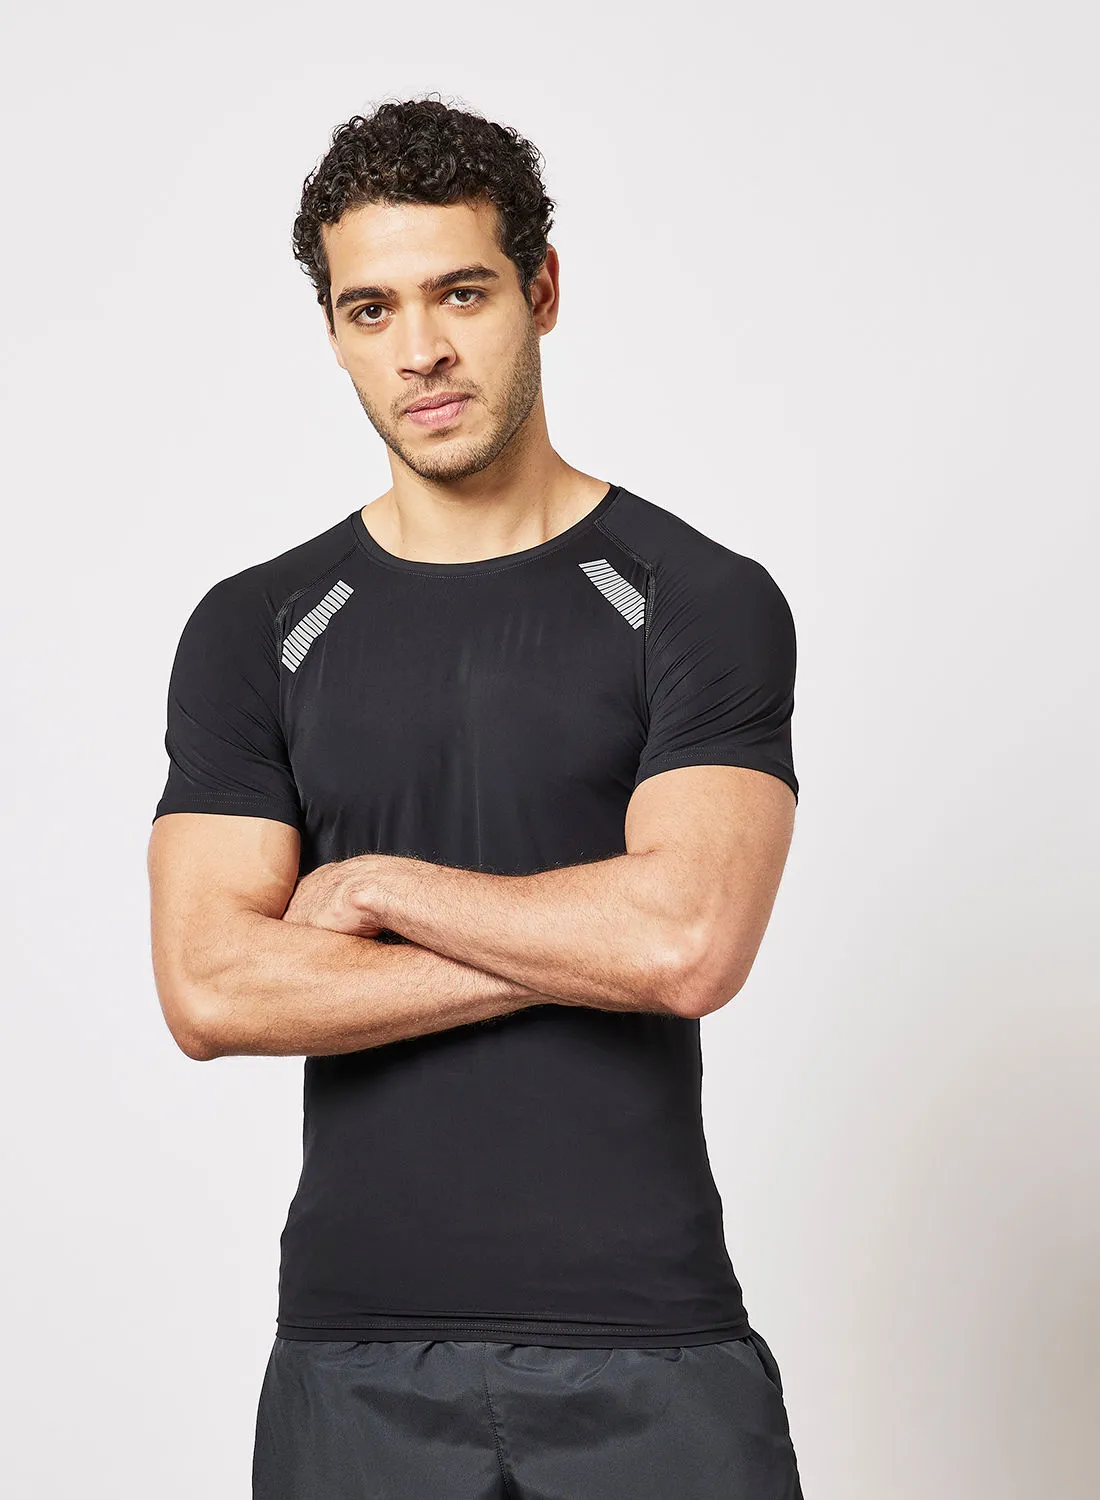 STATE 8 Active Sports T-Shirt أسود